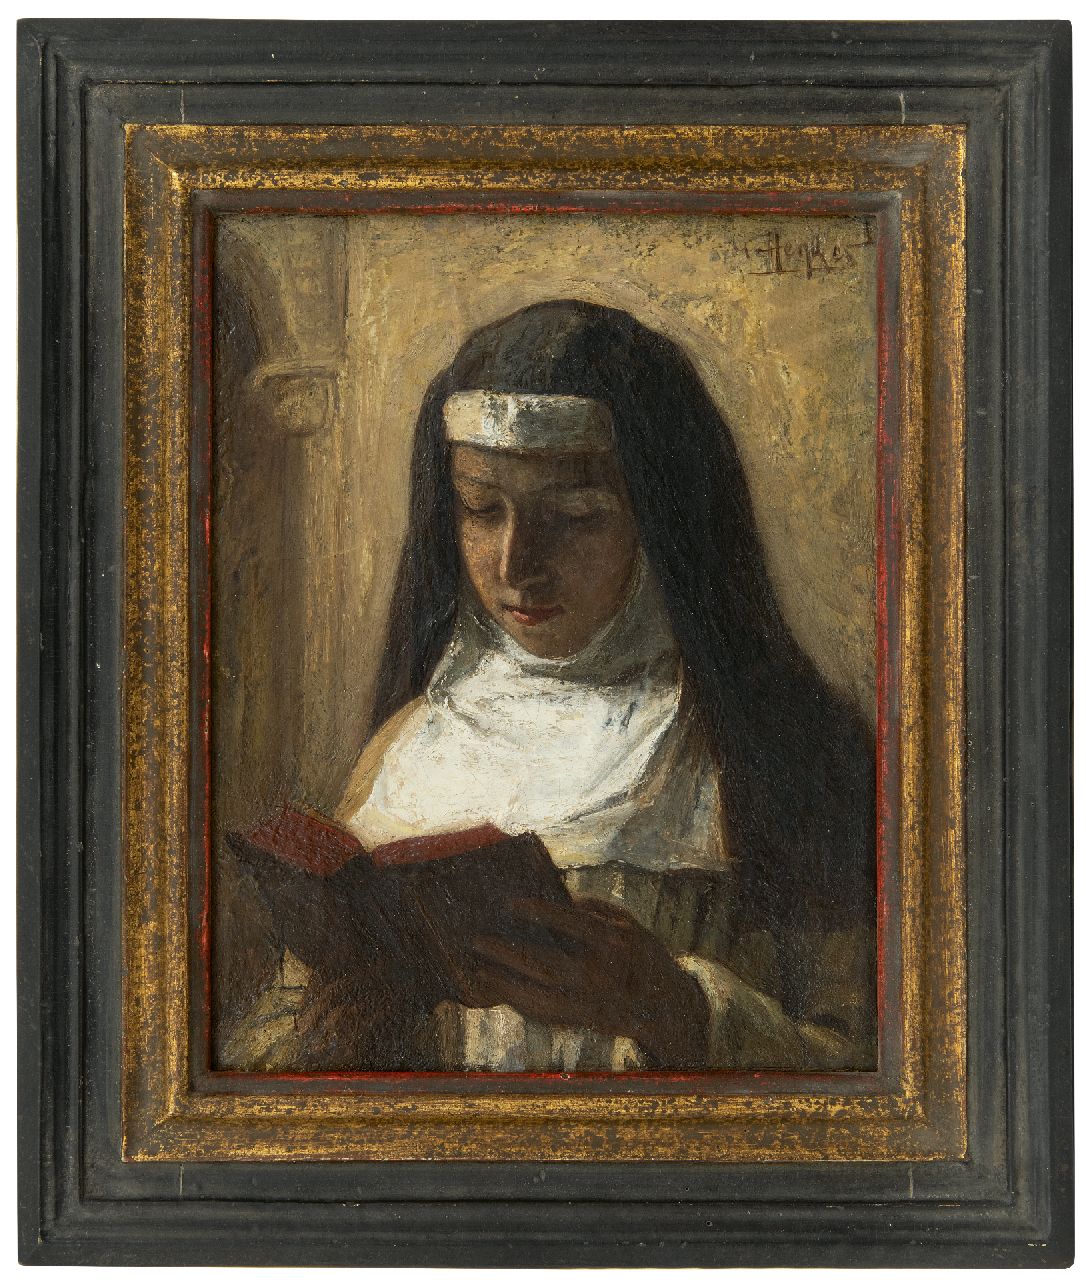 Henkes G.  | Gerke Henkes | Paintings offered for sale | The young nun, oil on canvas 26.4 x 20.7 cm, signed u.r.